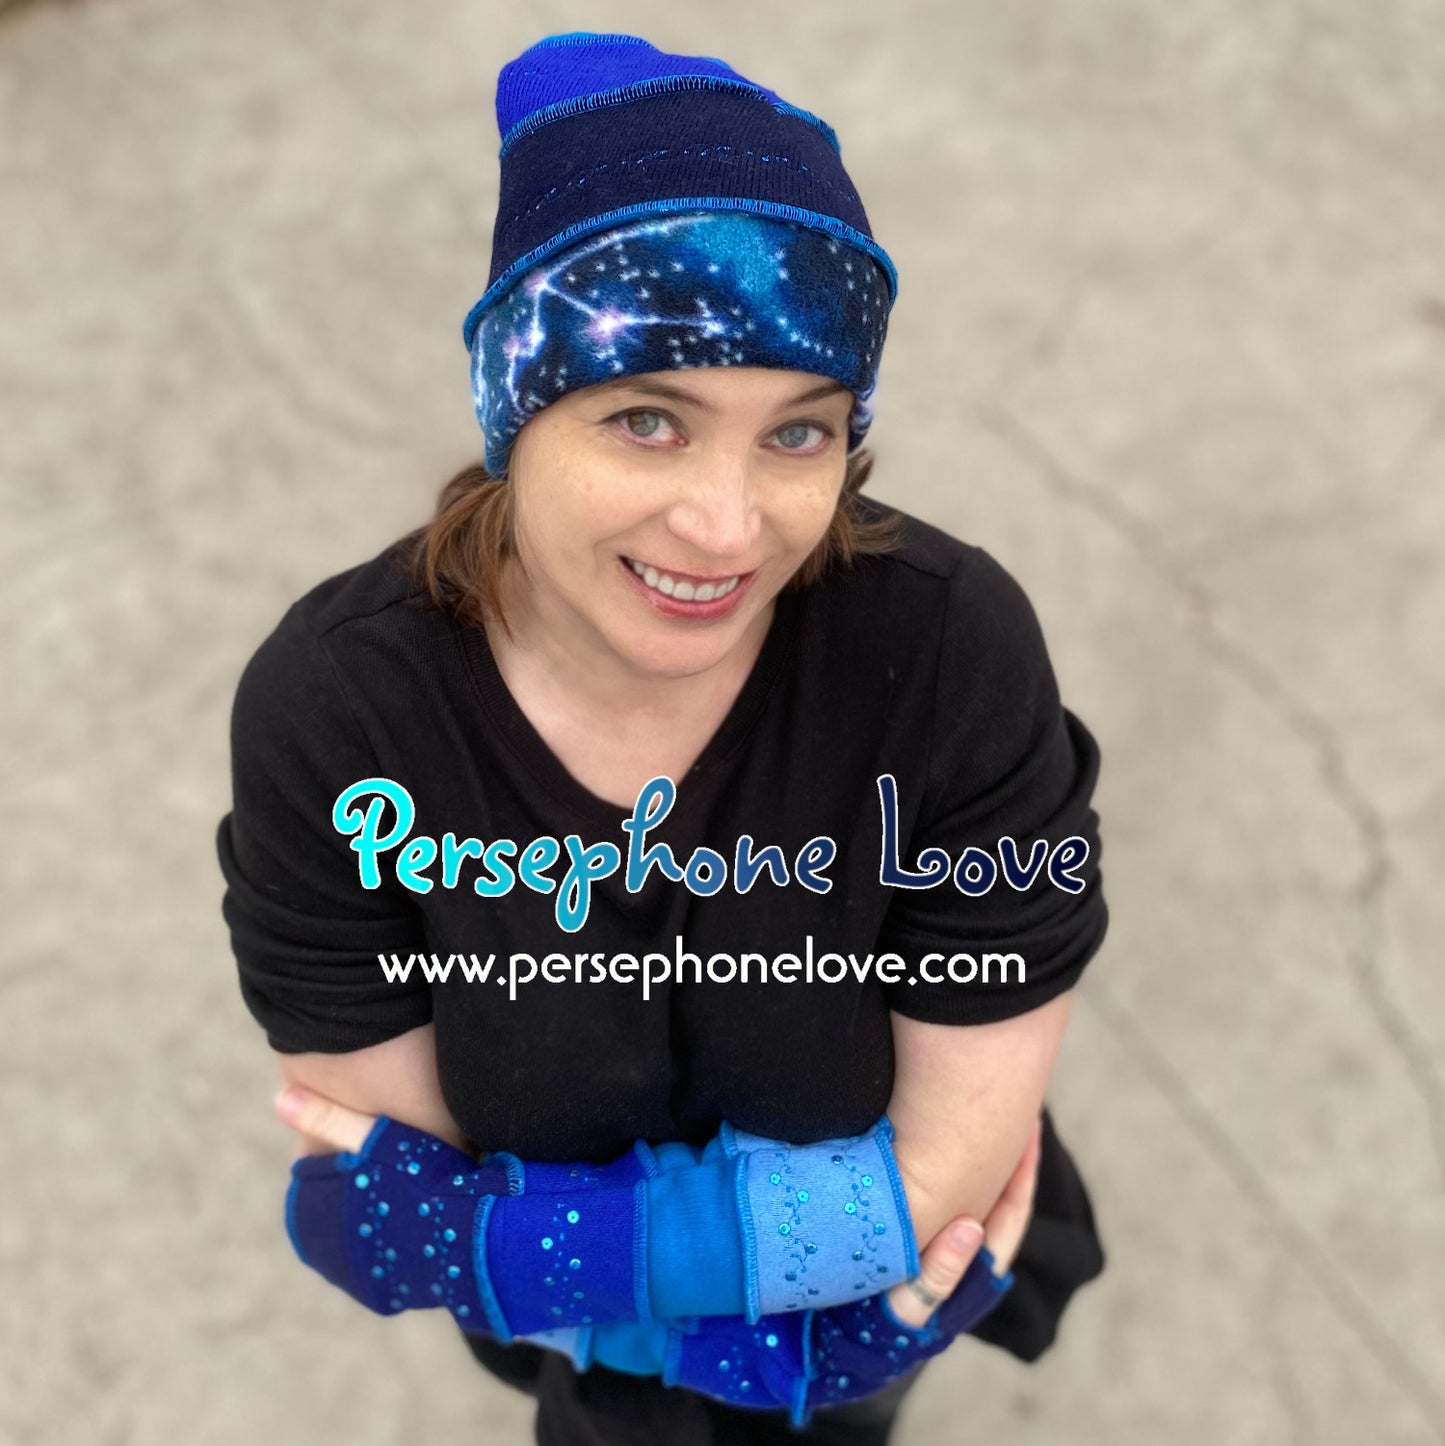 Katwise-inspired blue felted and embroidered galaxy pixie elf hat-1385